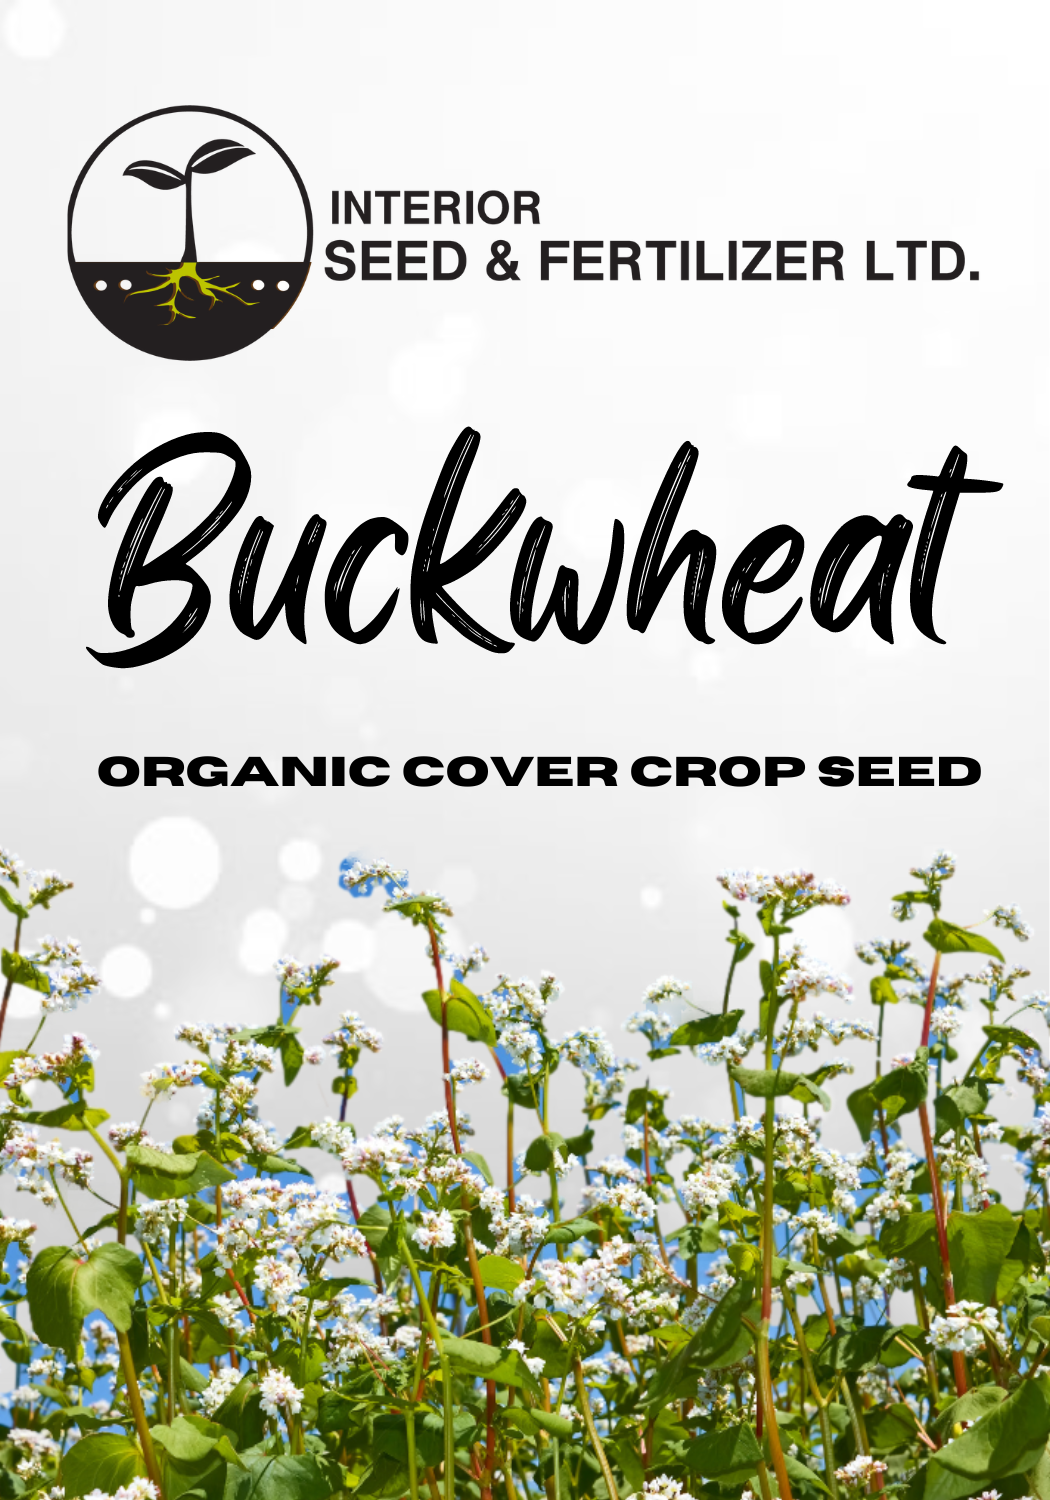 Buckwheat Organic Cover Crop Seed, at Interior Seed and Fertilizer Garden Center Cranbrook, BC